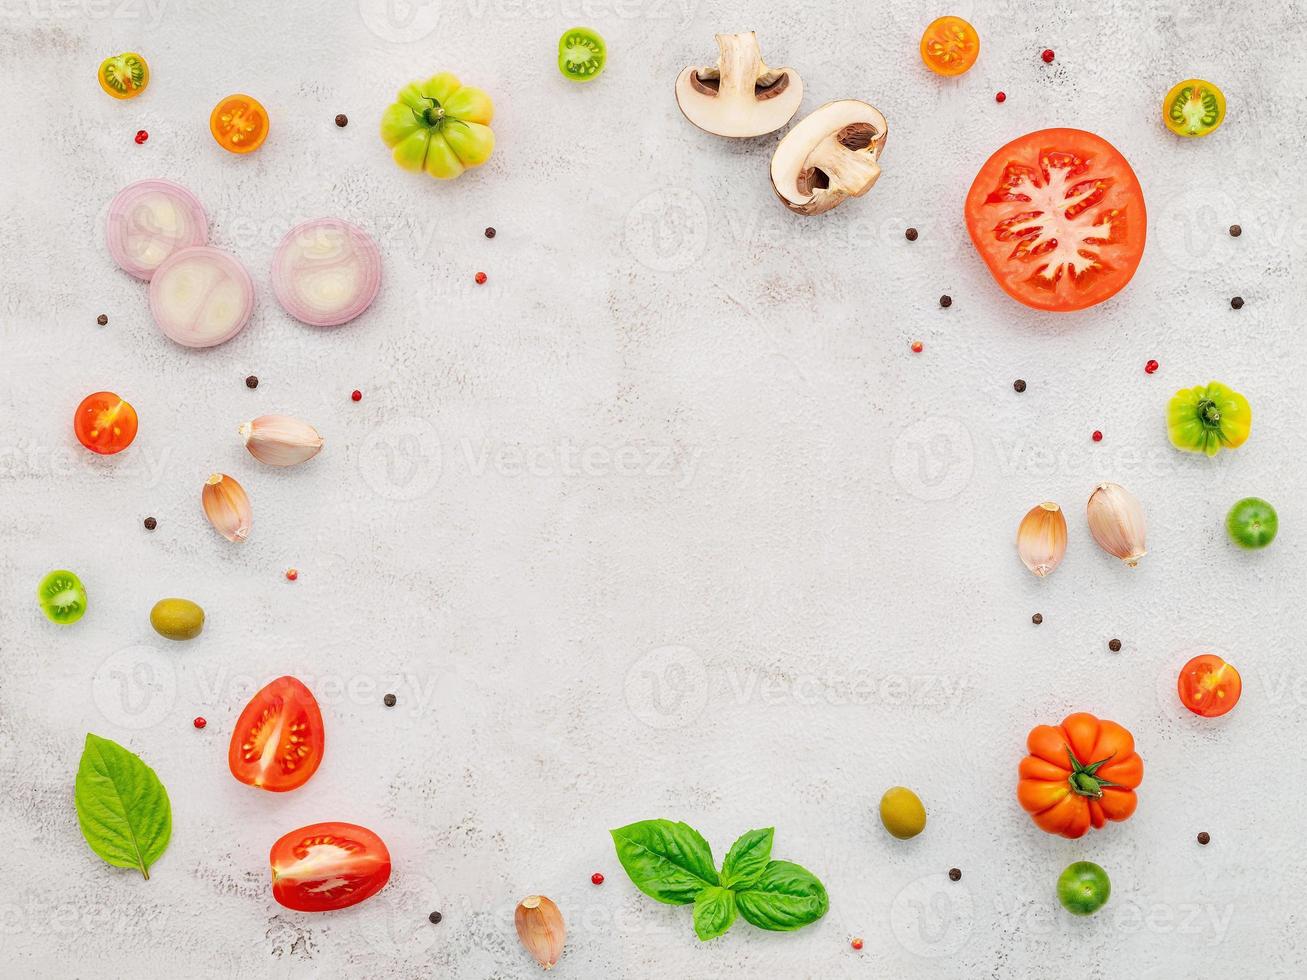 The ingredients for homemade pizza set up on white concrete background. photo